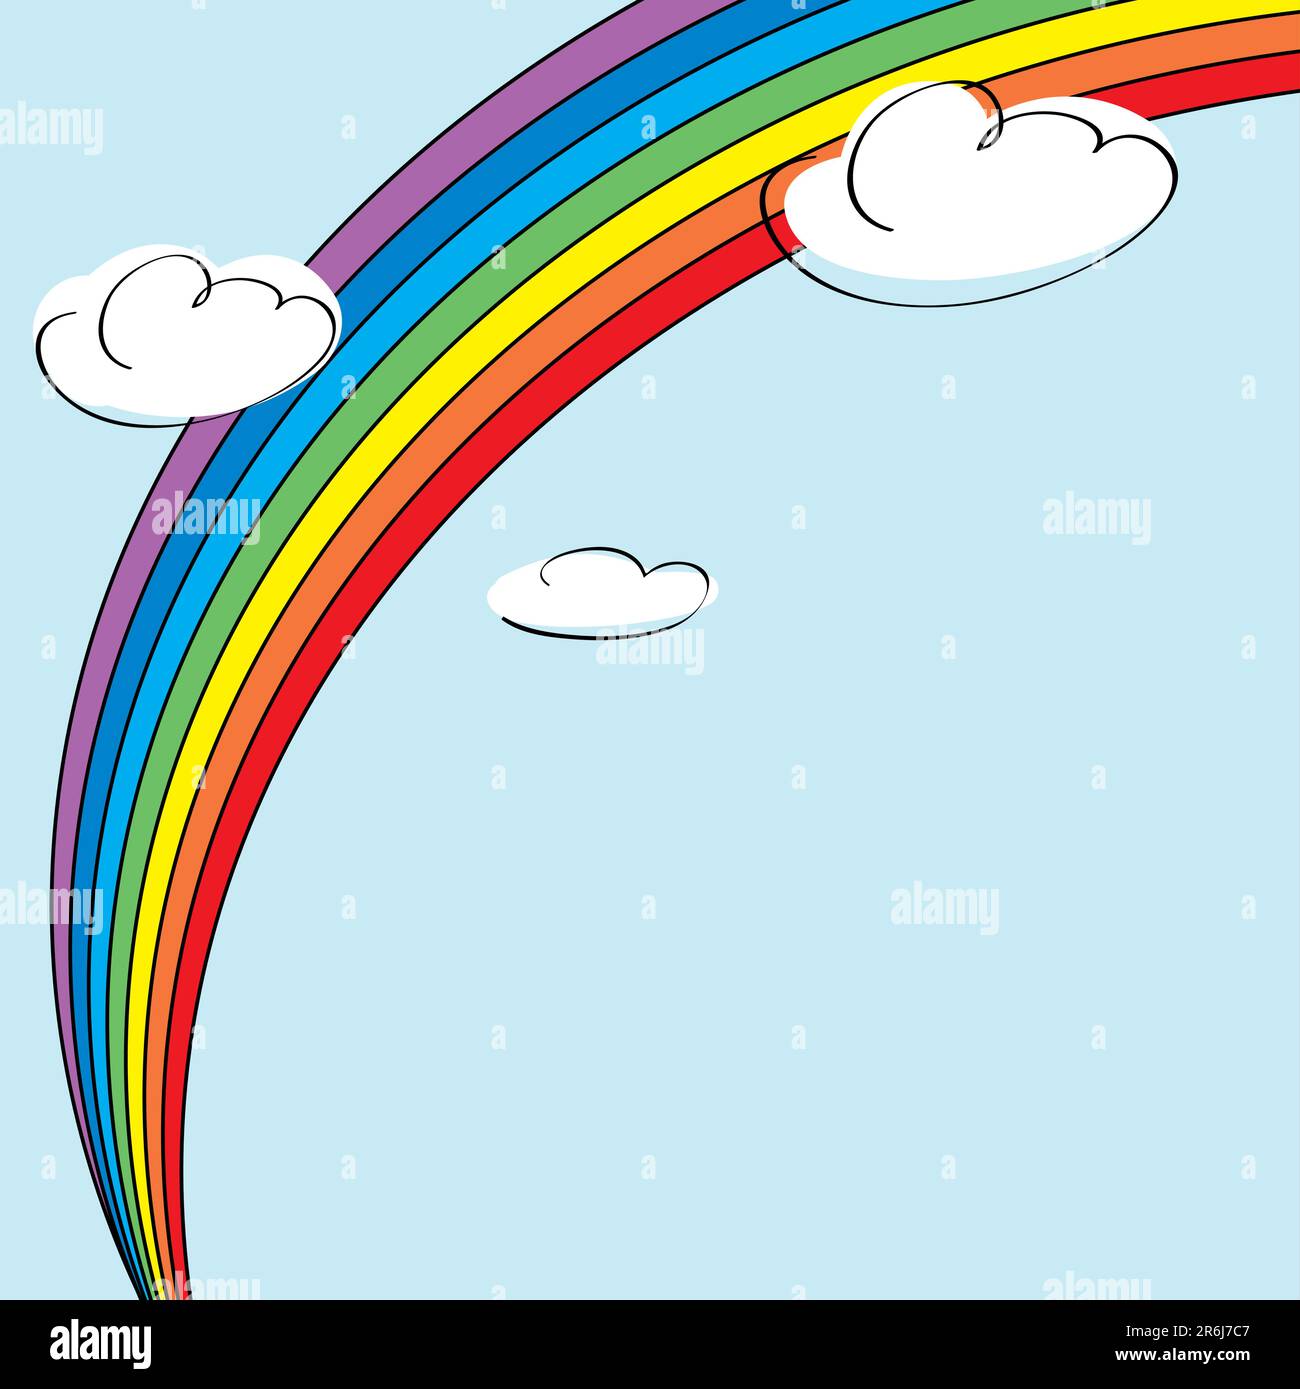 Rainbow and clouds background illustration Stock Vector